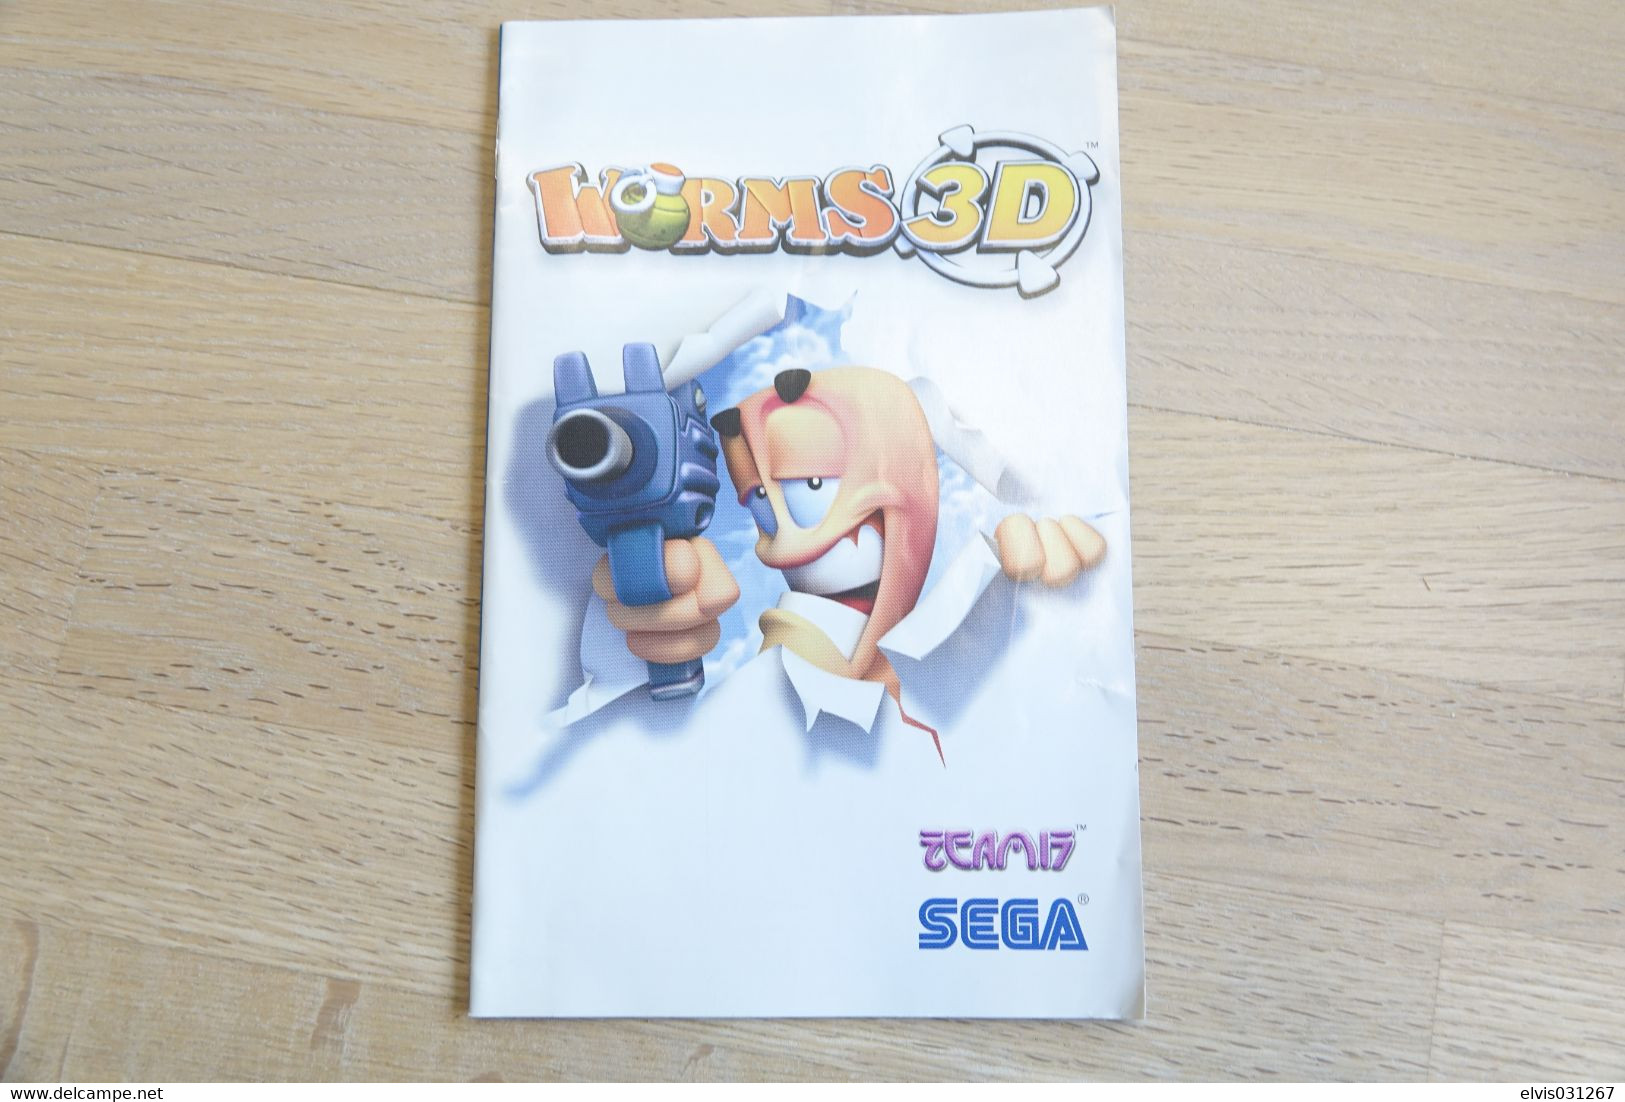 SONY PLAYSTATION TWO 2 PS2 : MANUAL : WORMS 3D - Letteratura E Istruzioni